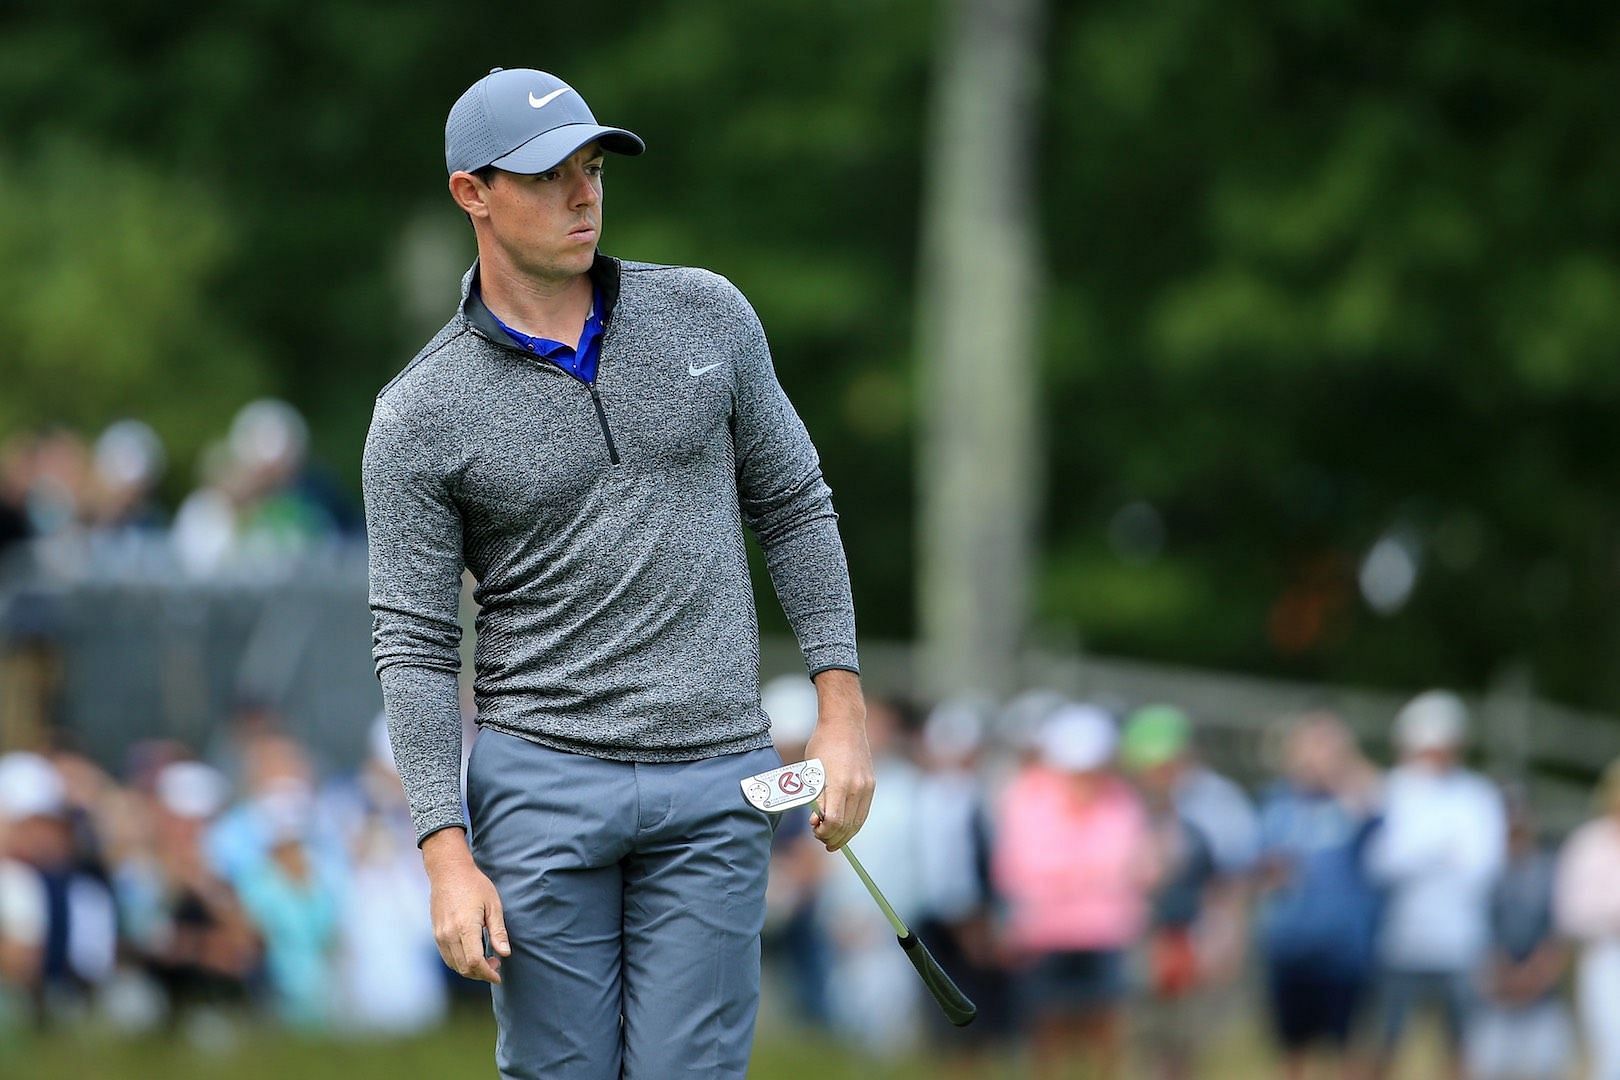 Rory McIlroy has been associated with Nike for long 